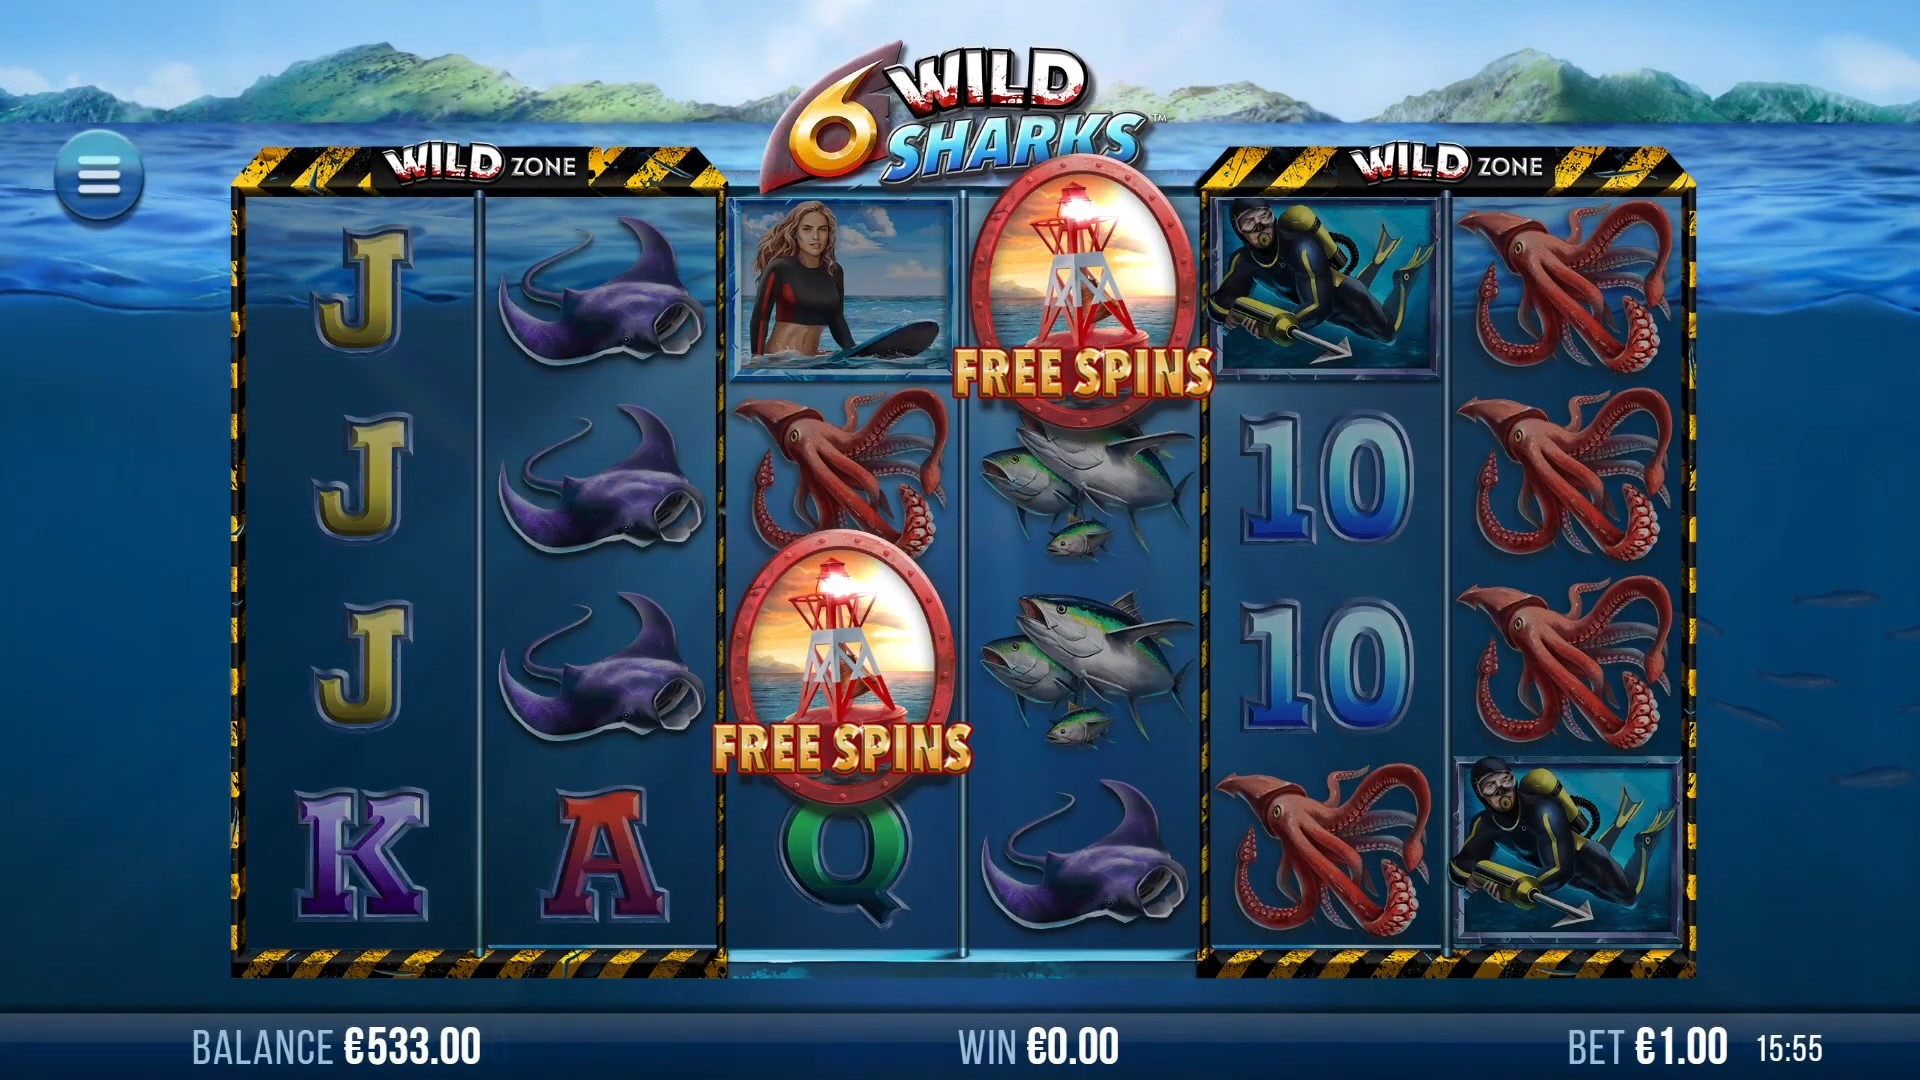 6 Wild Sharks free spin 4ThePlayer